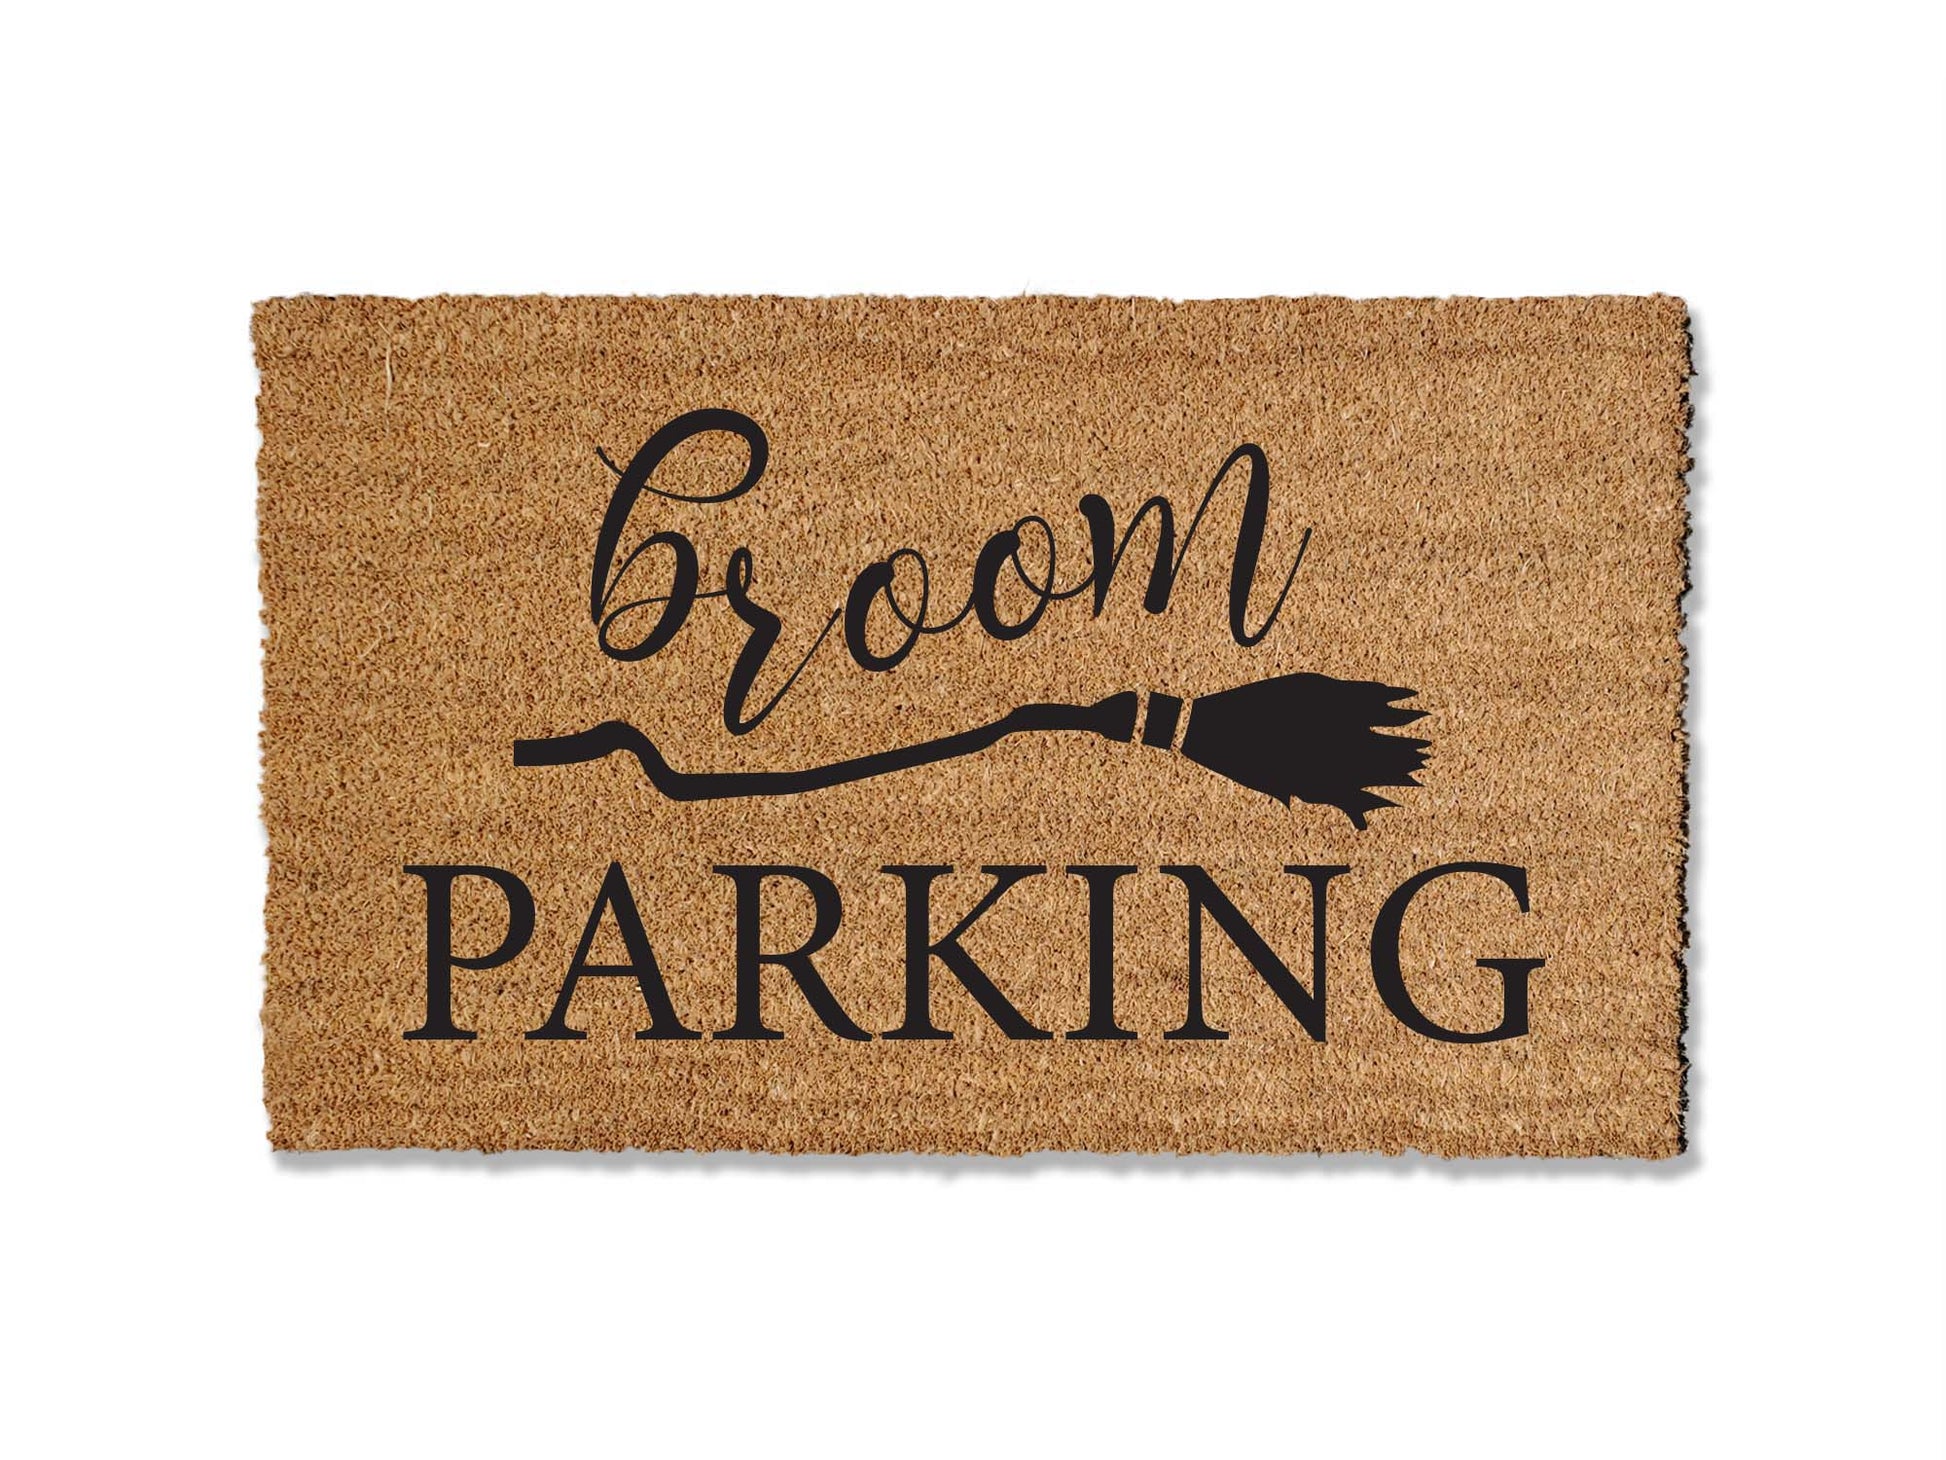 1/2 inch thick coir doormat featuring a funny Halloween doormat saying broom parking, adding a touch of intrigue to your entryway. Highly effective at trapping dirt, this mat combines functionality with a unique and eye-catching aesthetic to elevate your doorstep.